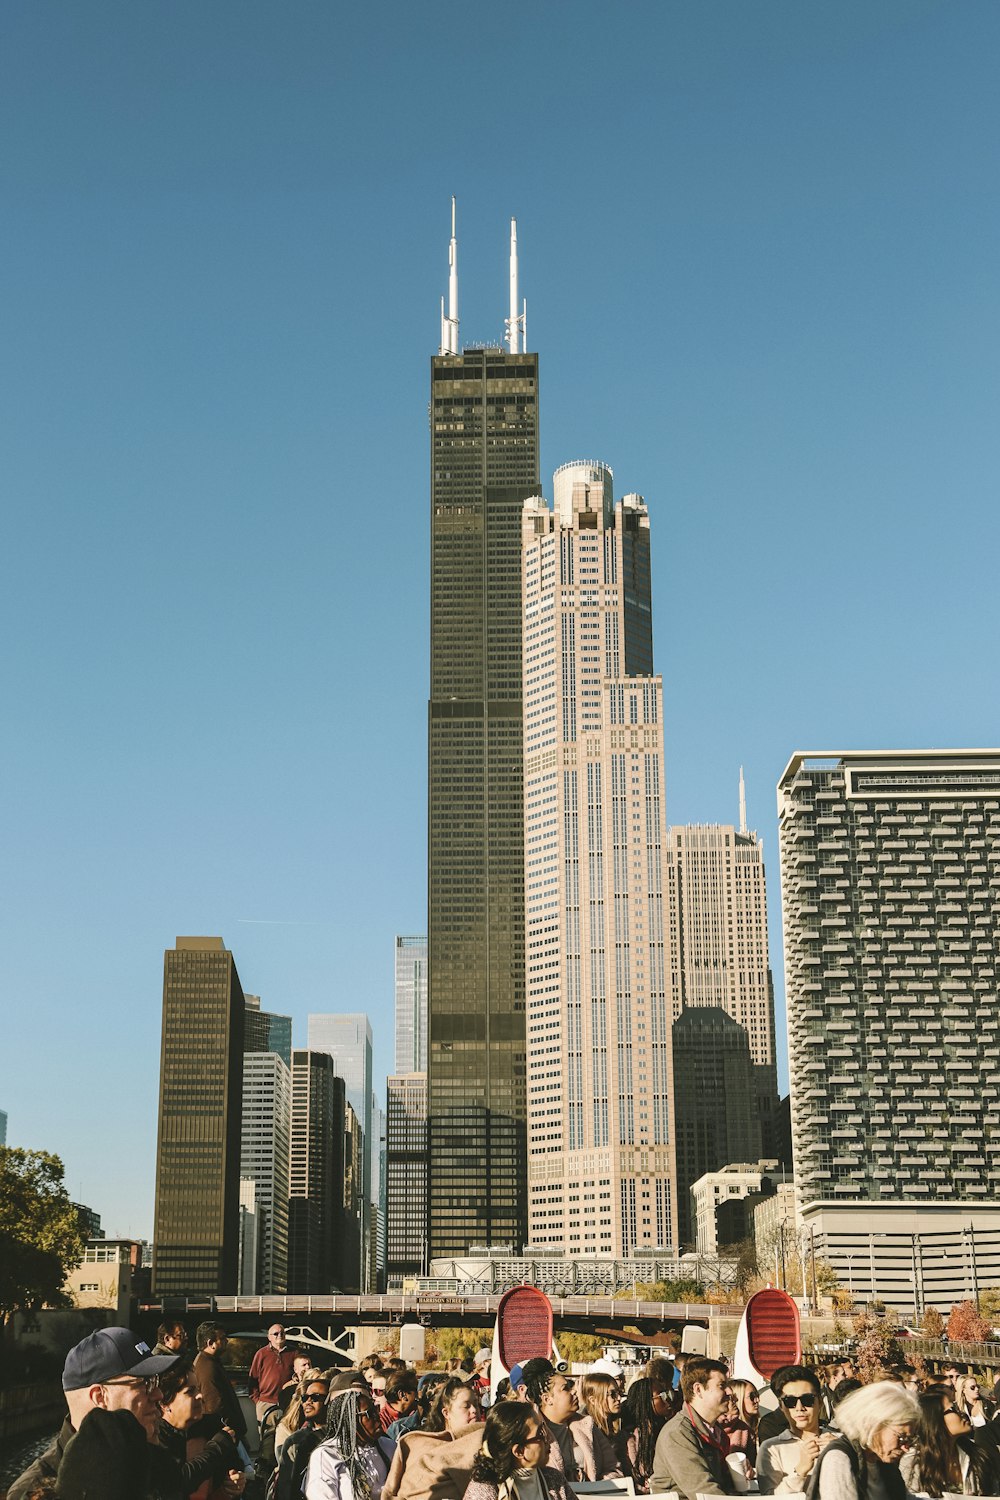 a crowd of people standing in front of a tall building